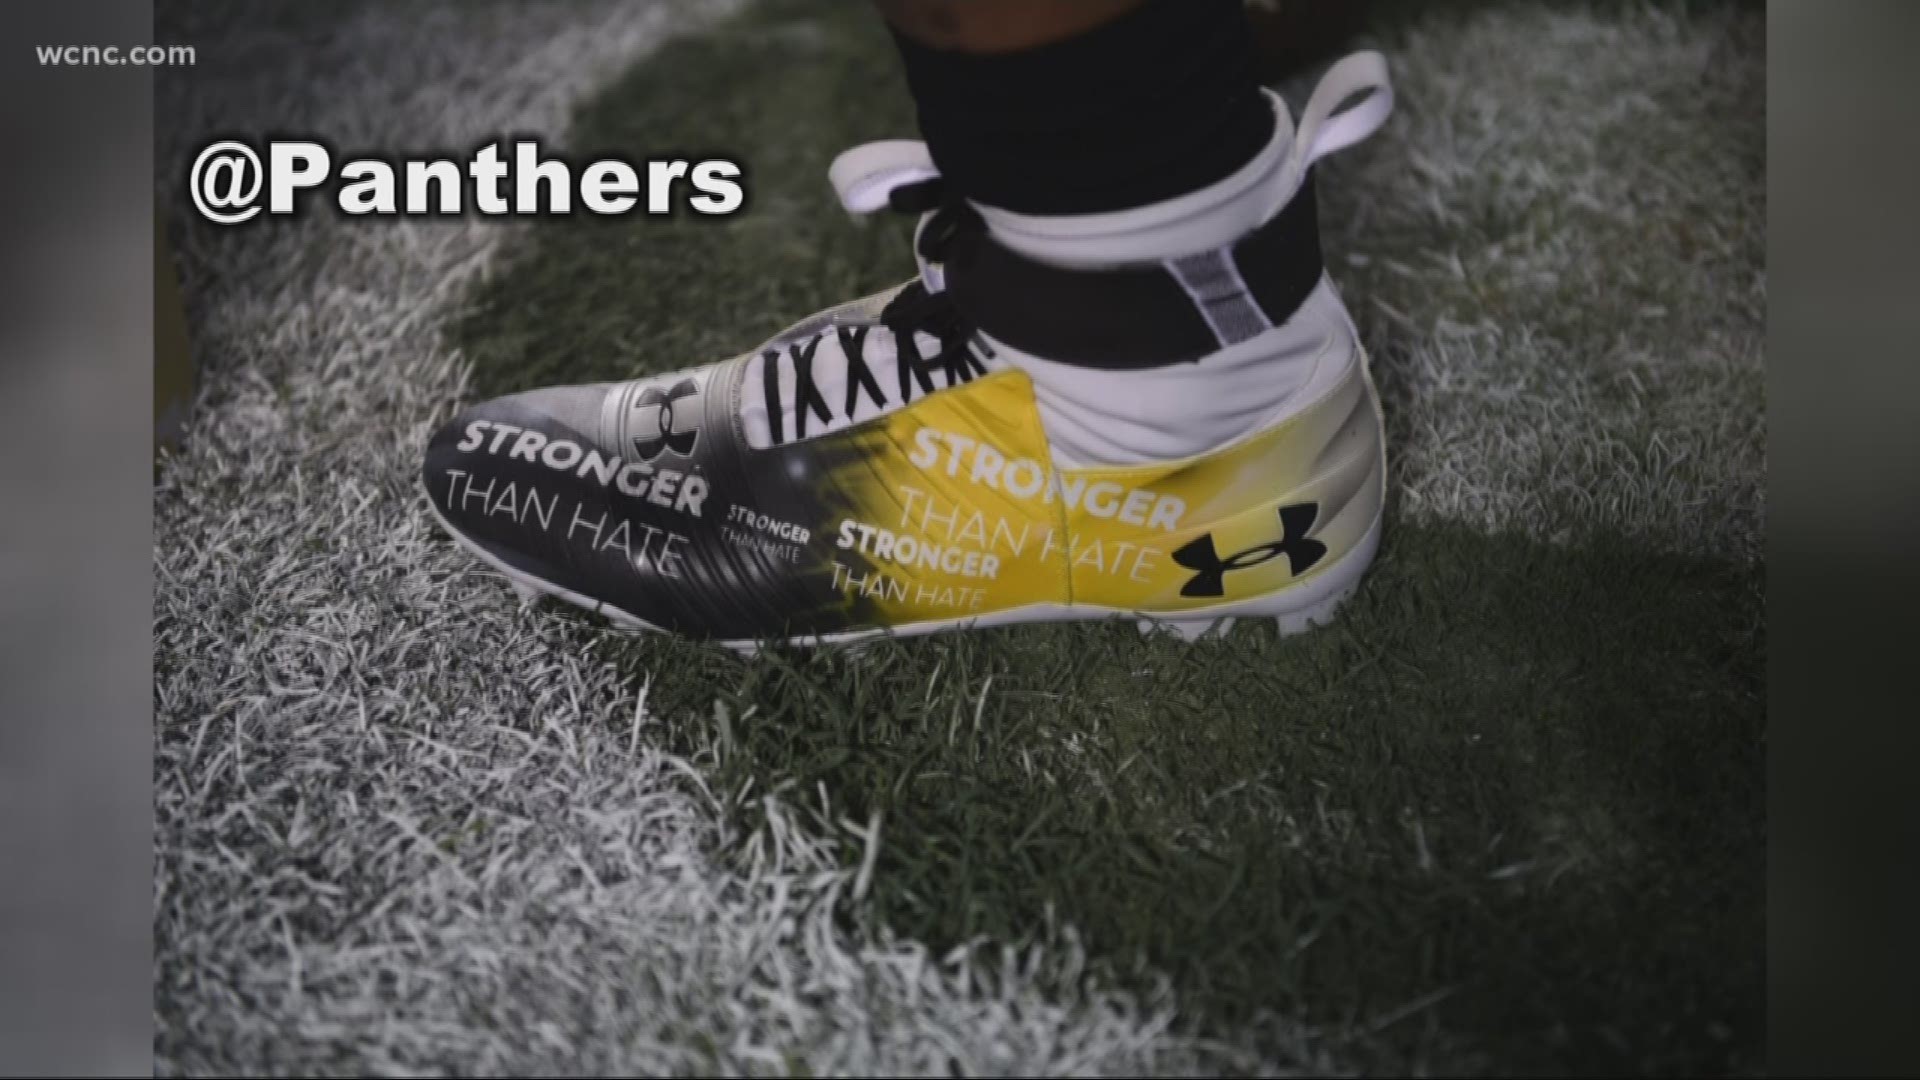 Carolina Panthers quarterback Cam Newton paid tribute to the victims of the Pittsburgh synagogue shooting with a special pair of cleats during pre-game warmups Thursday.